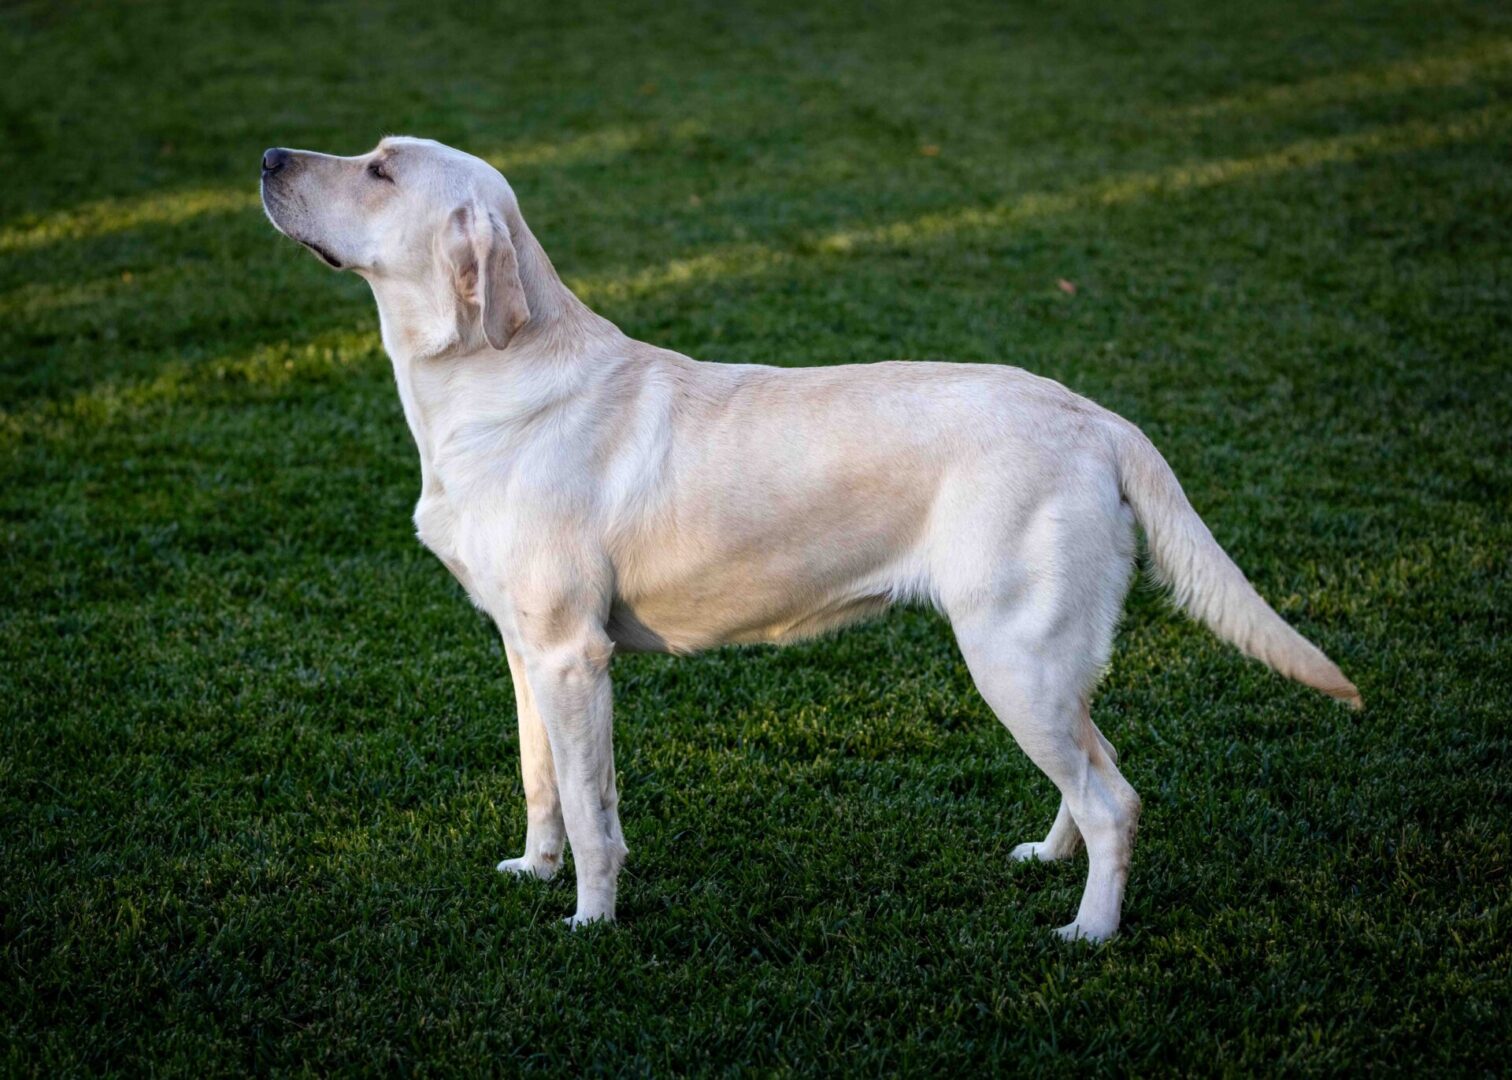 A white dog standing in the grass looking up.